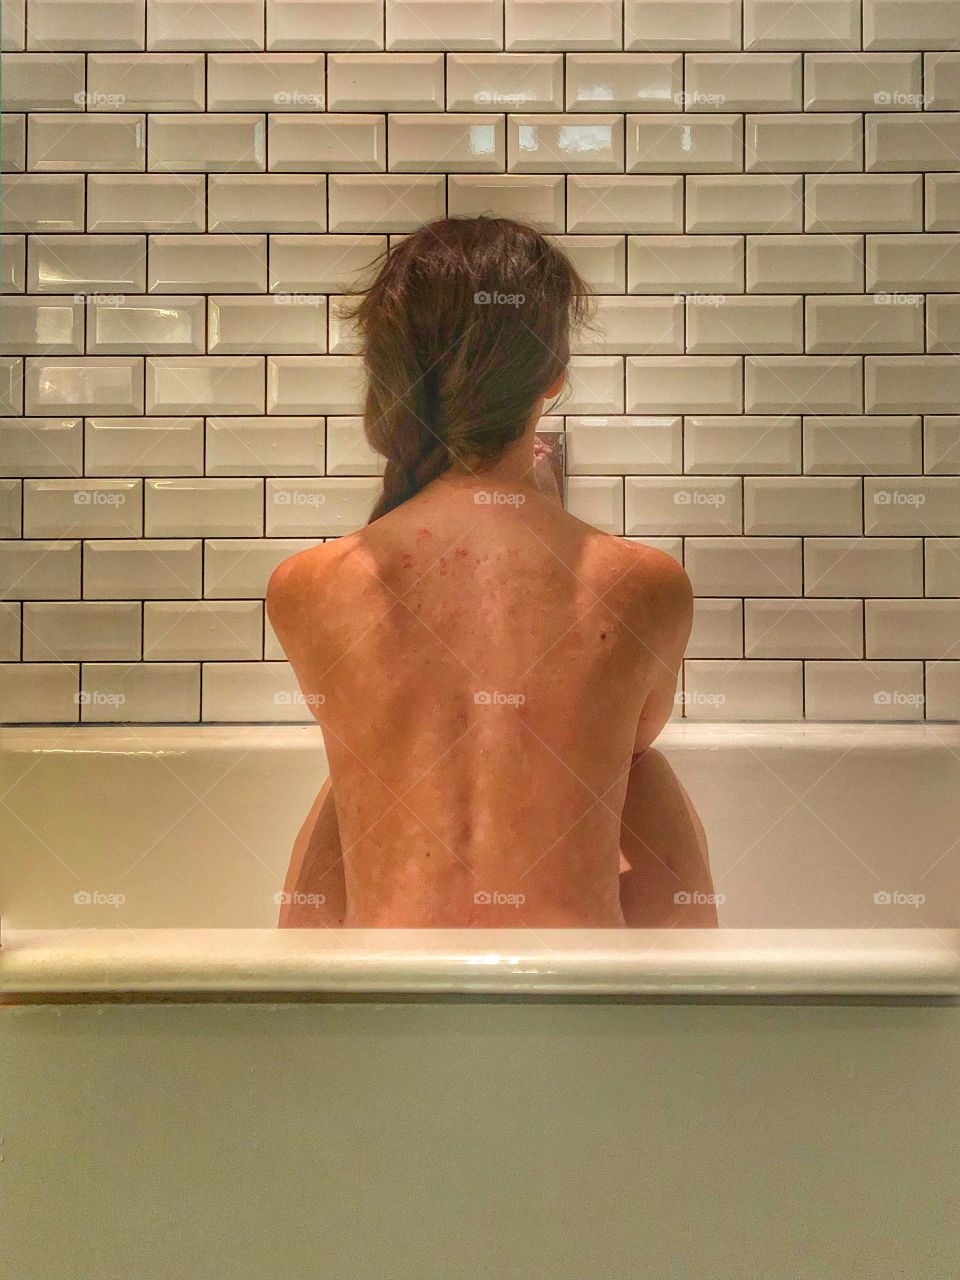 Young woman sits naked in bath with her back to the camera with metro tiles in background